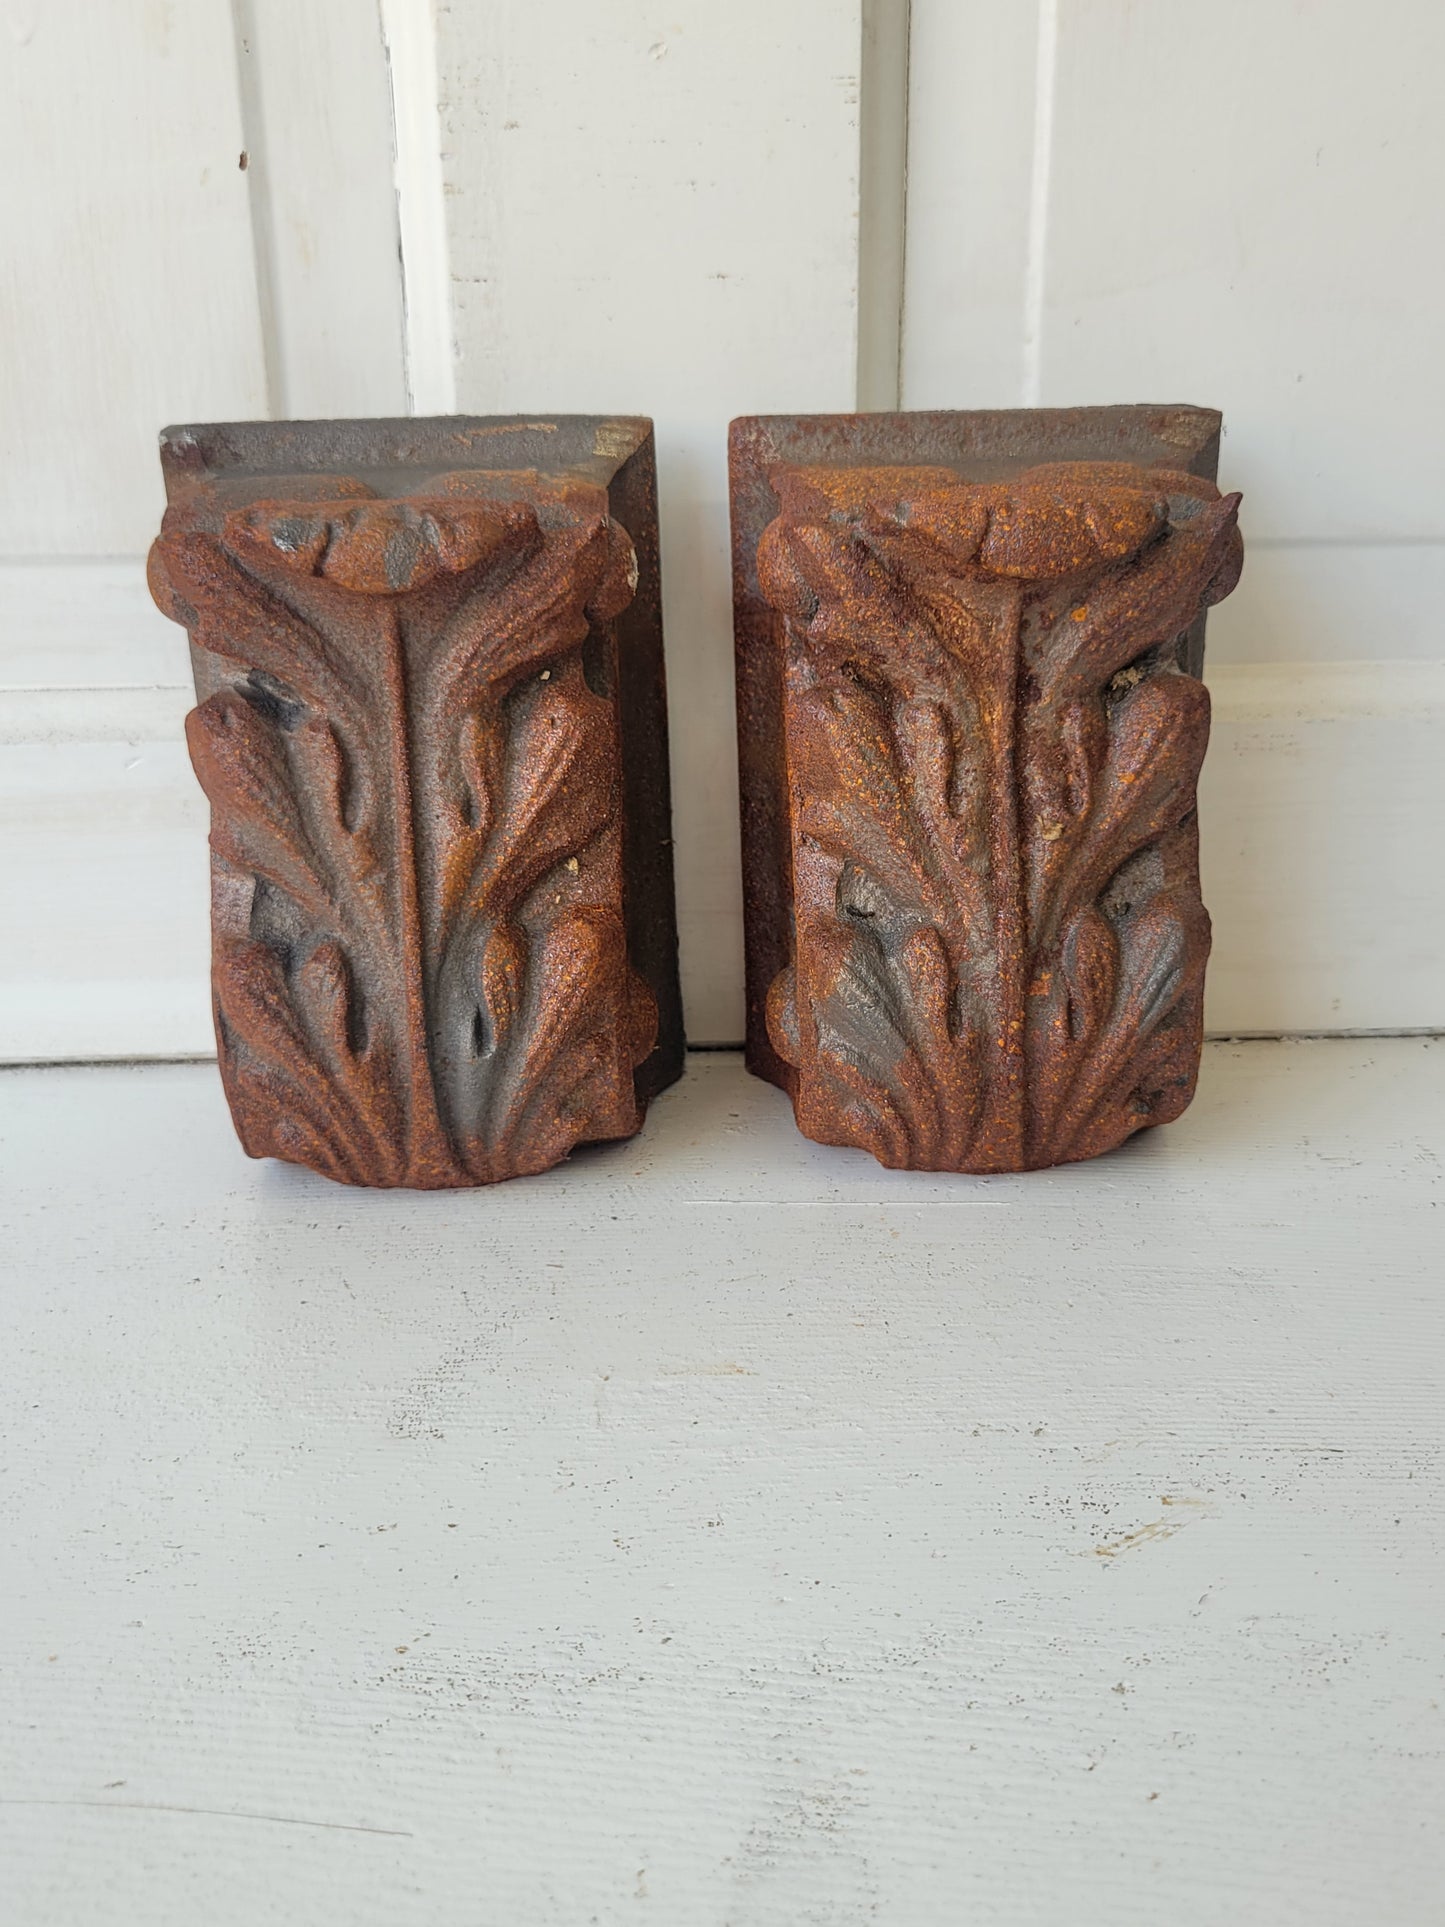 Pair of Vintage Cast Iron Corbels, Set of Iron Acanthus Leaf Bookends